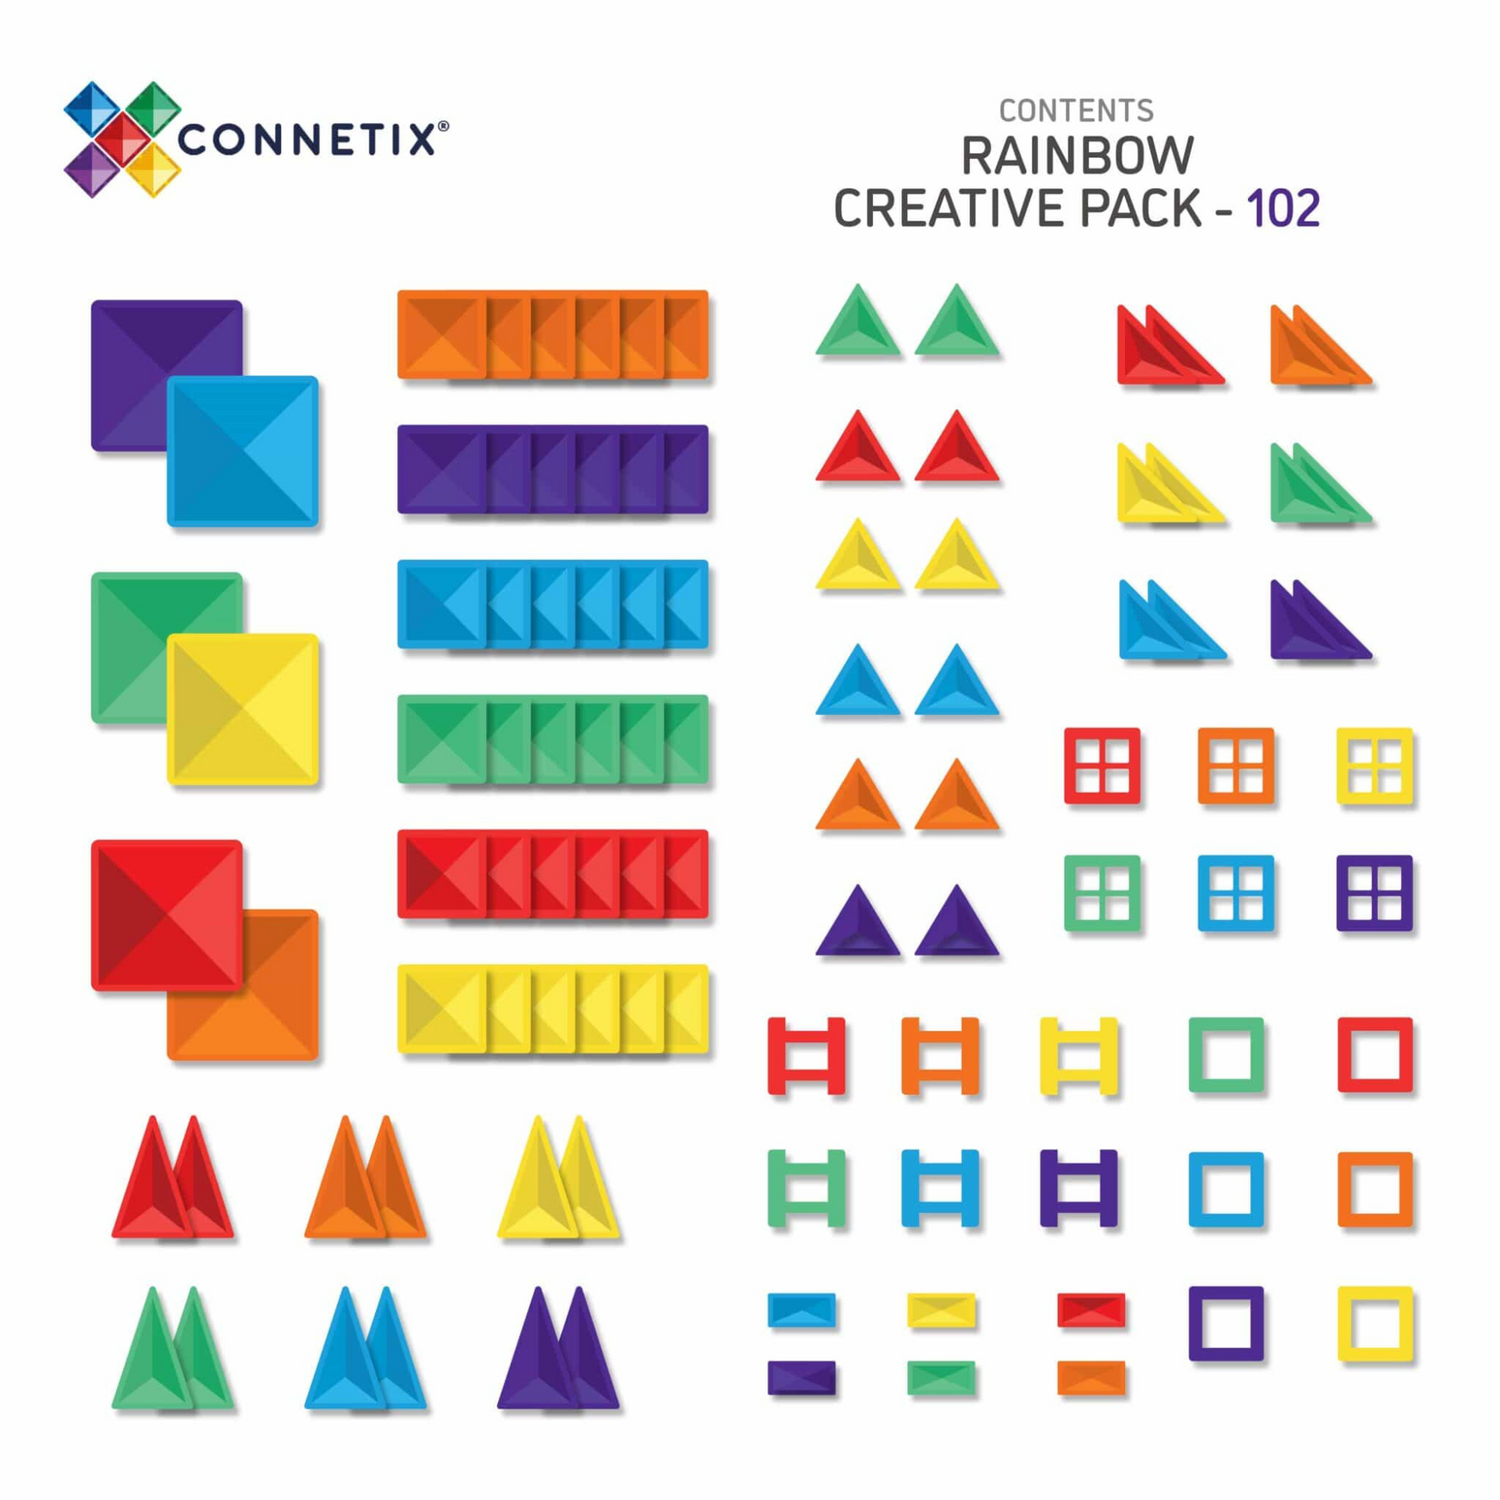 Connetix 100-pieces magnetic constructor - Rainbow Creative pack